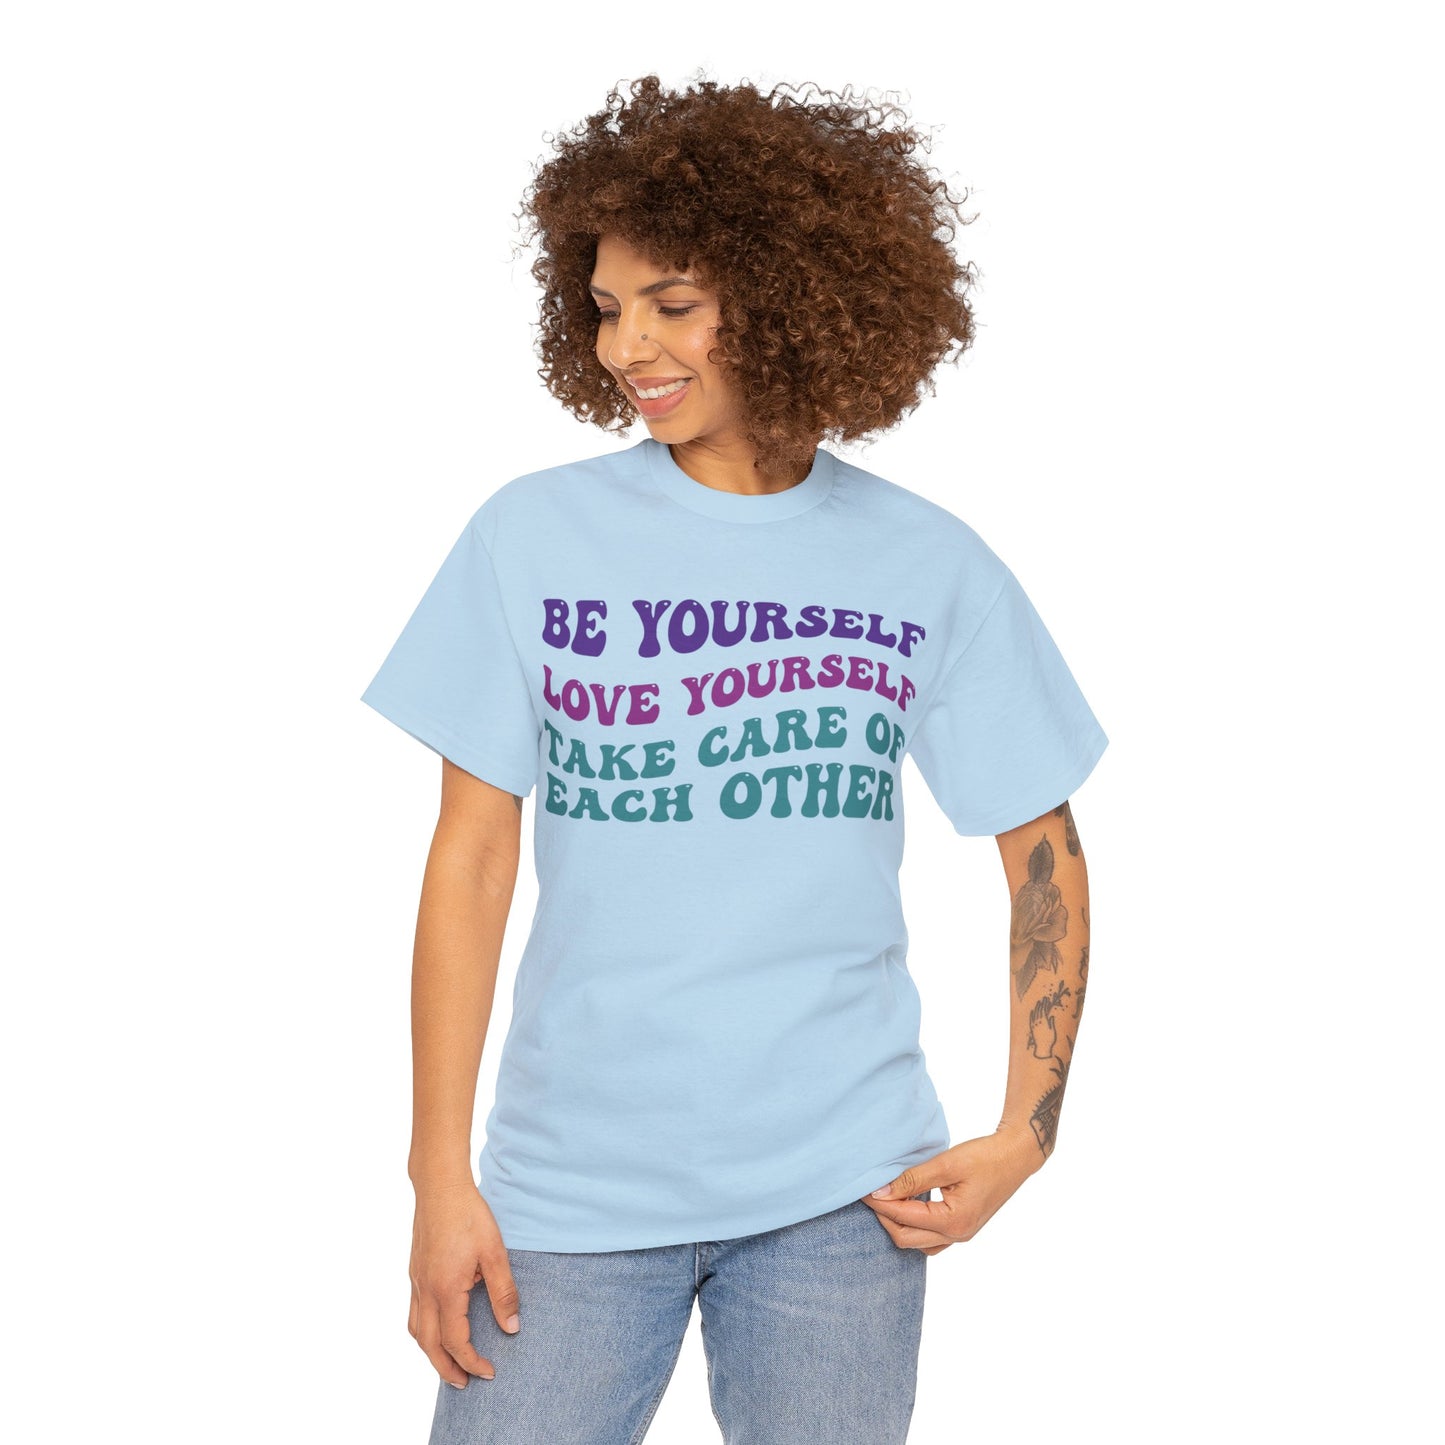 Be Yourself, Love Yourself, Take Care of Each Other T-Shirt, Funky Retro Tee, Gift for Nice People